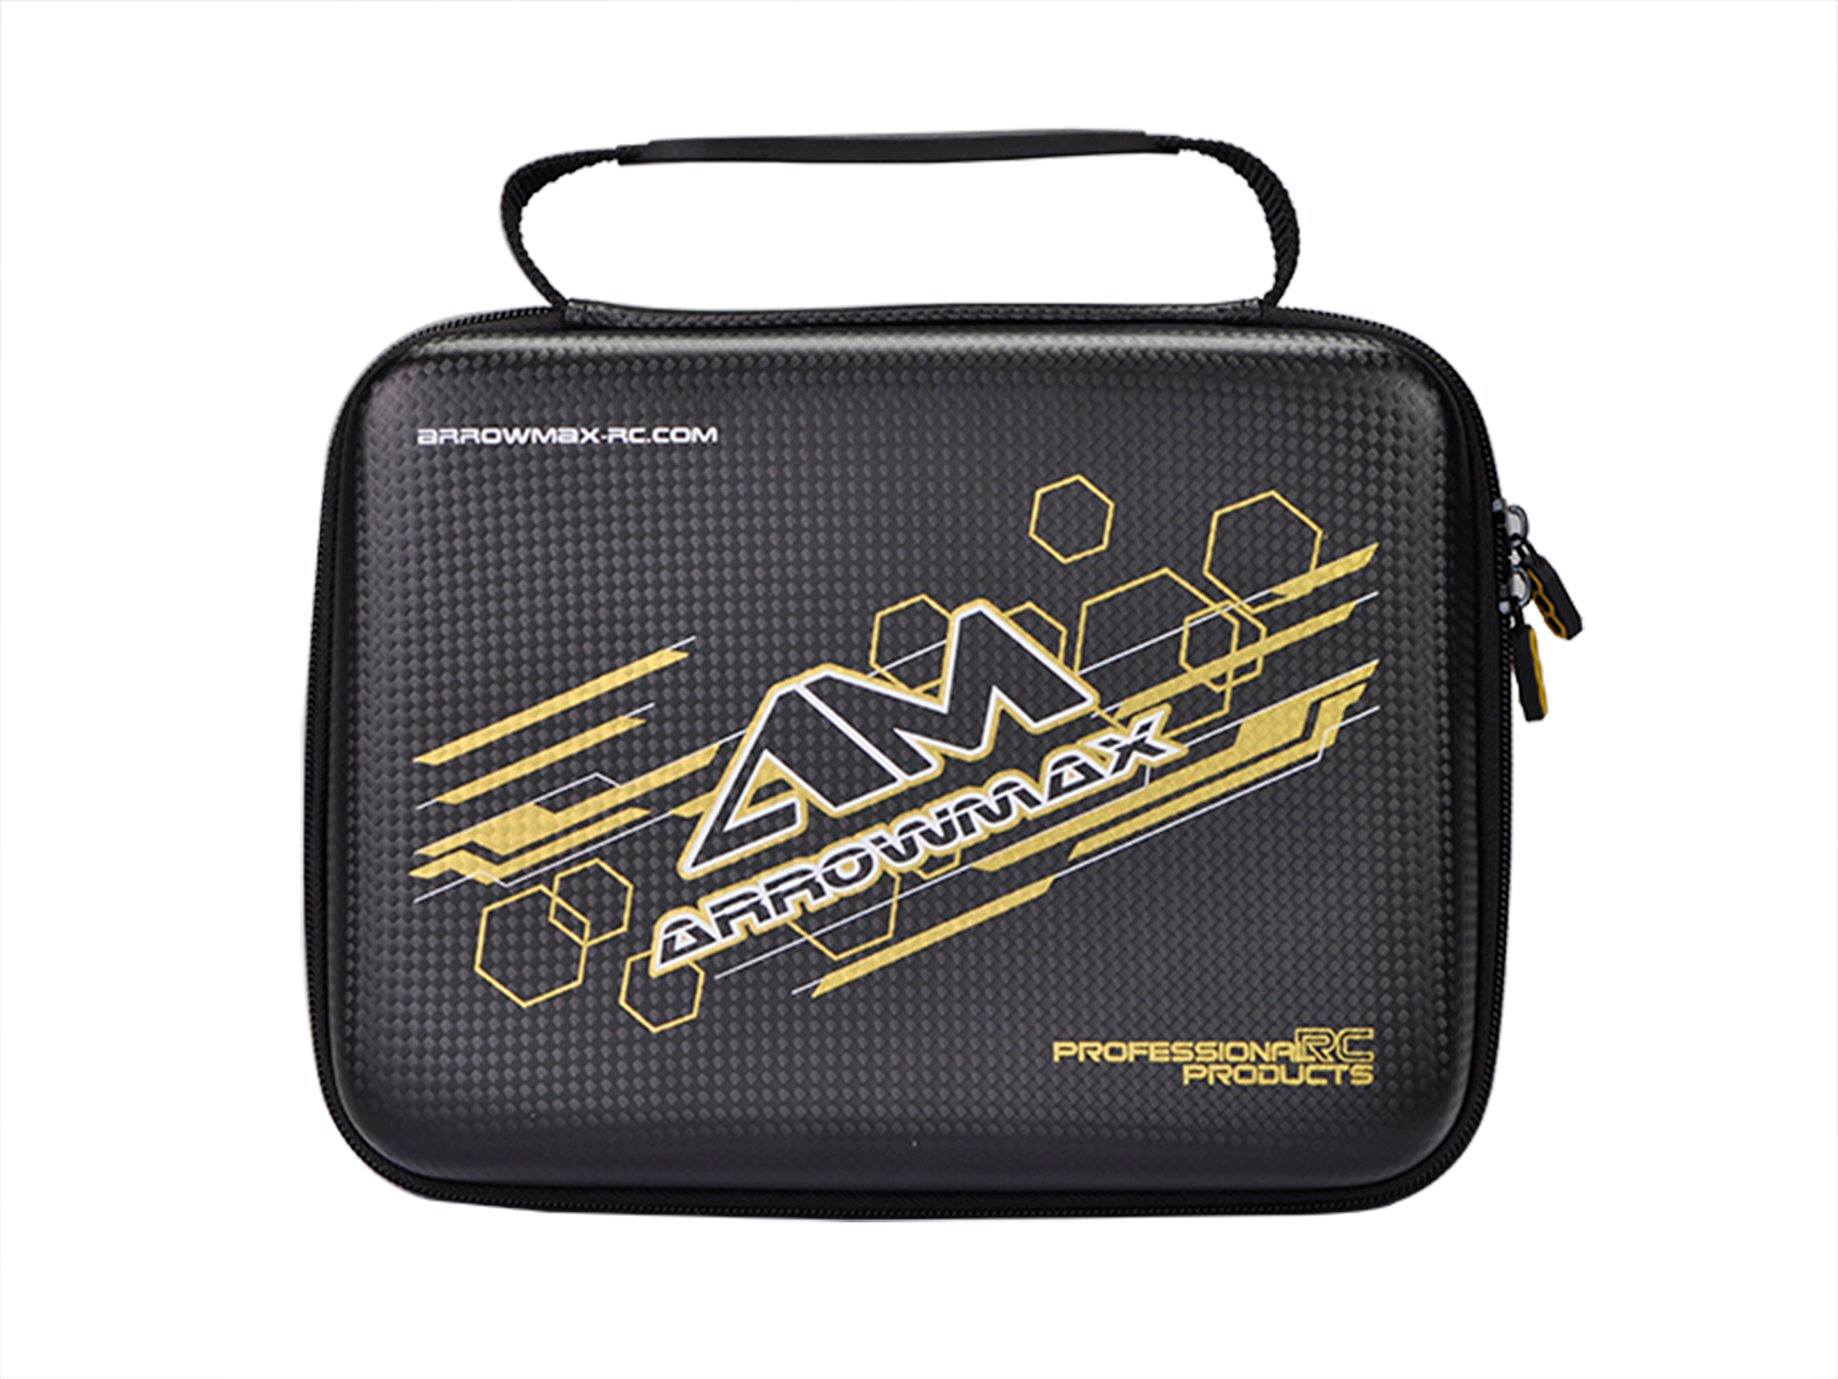 Arrowmax Accessories Bag (240 x 180 x 85mm)  With Bumbers